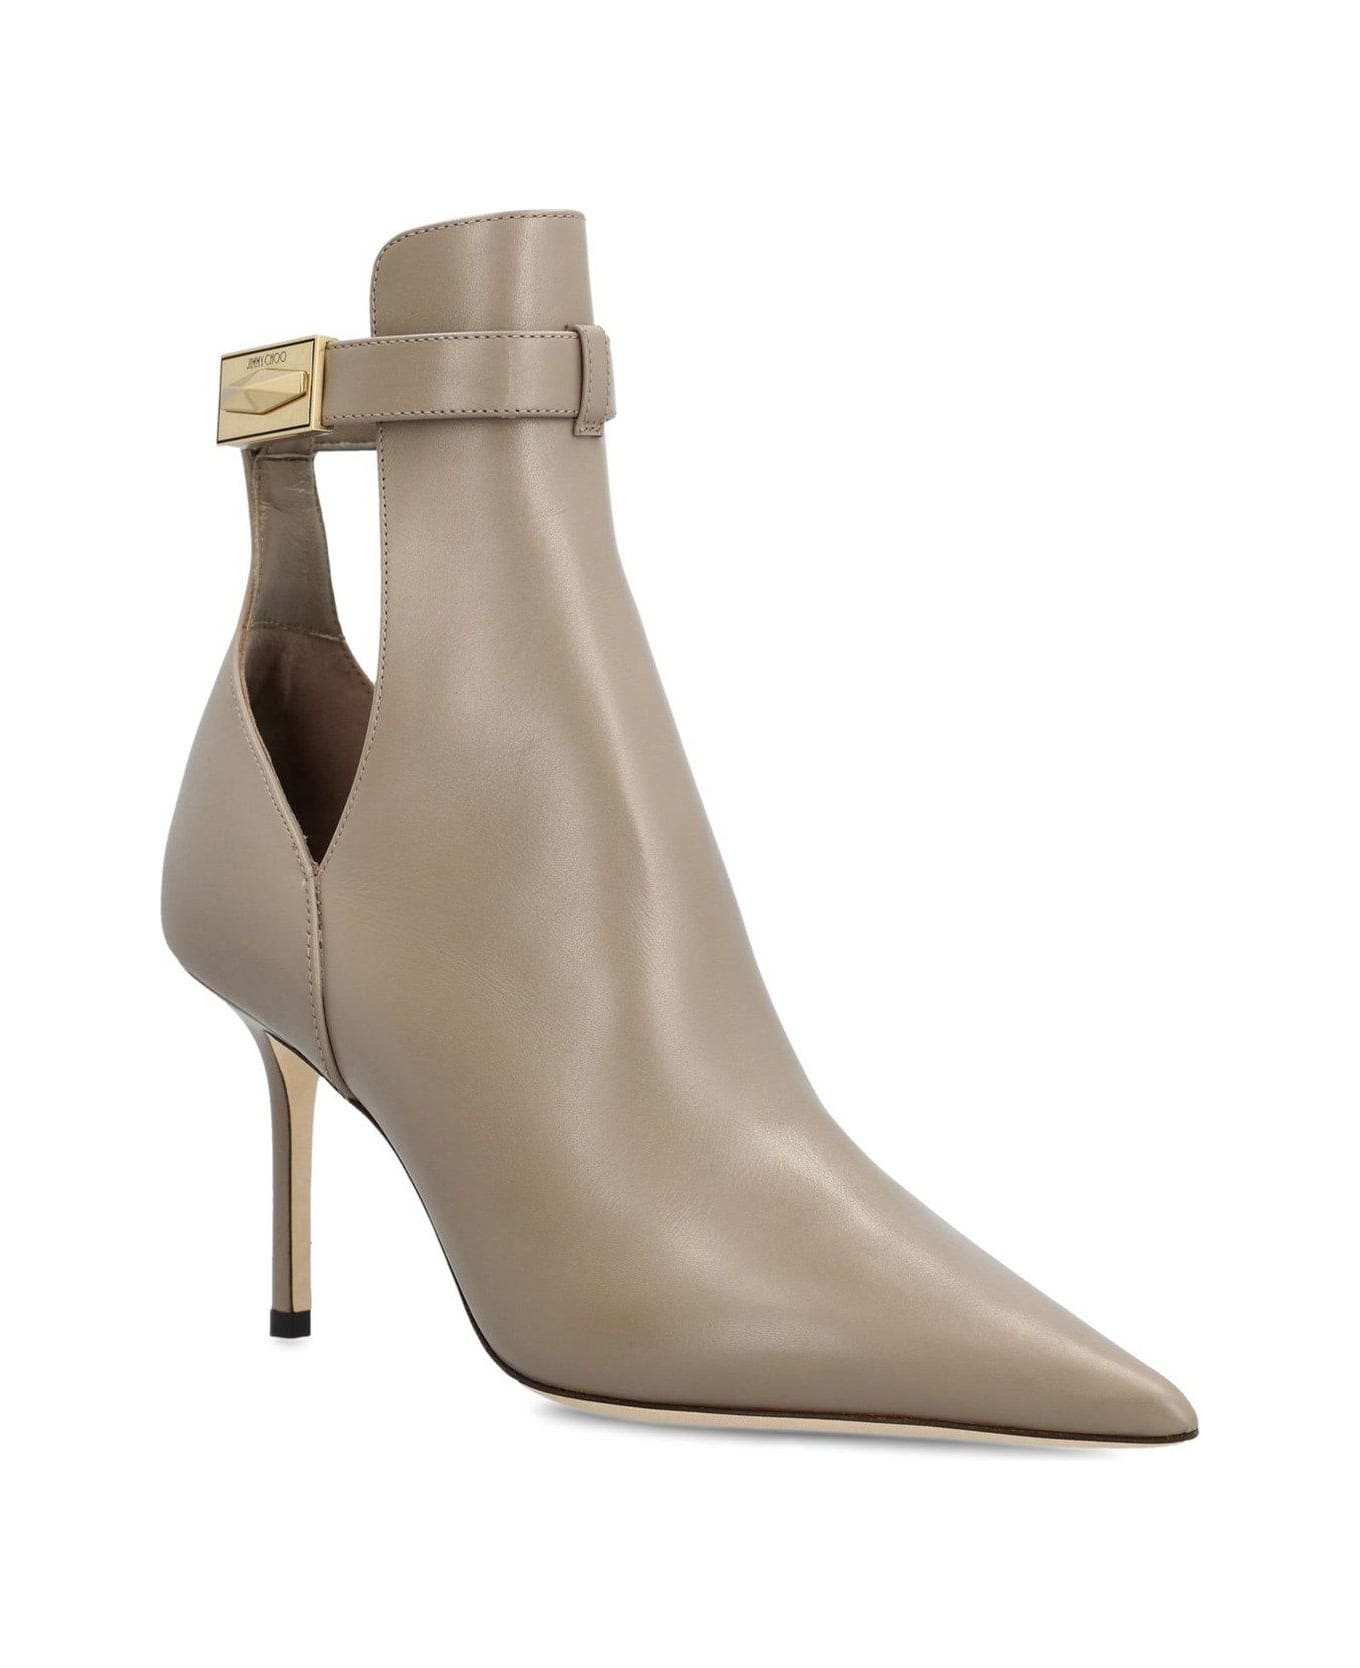 Jimmy Choo Nell 85 Cut-out Pointed-toe Ankle Boots - Dove Grey